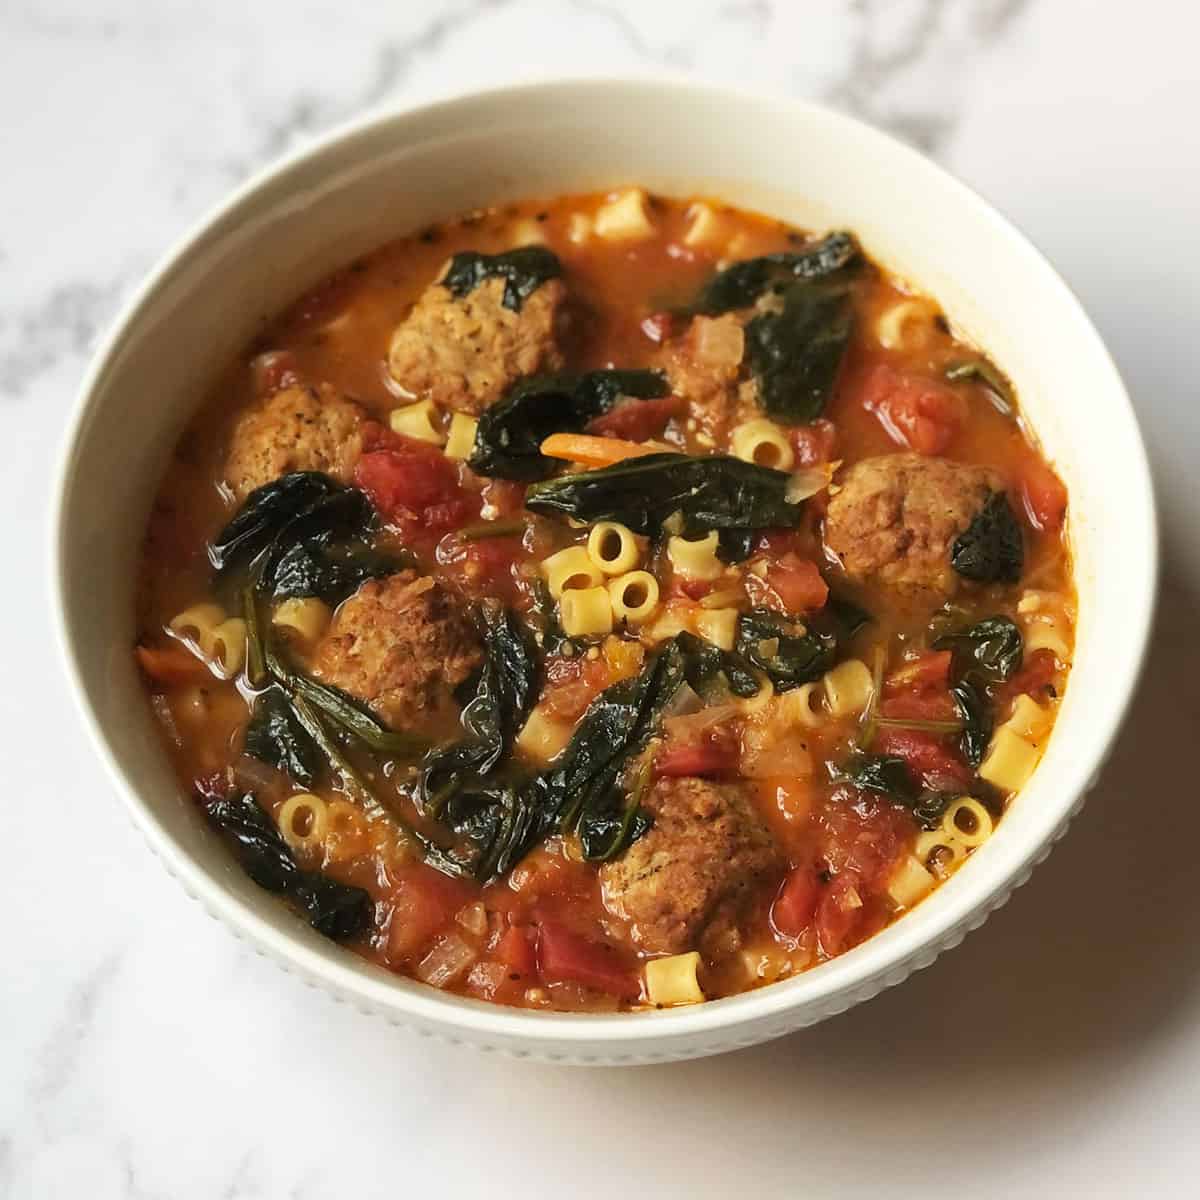 Lactation Soup (soup with spinach, meatballs, and pasta) in a white bowl